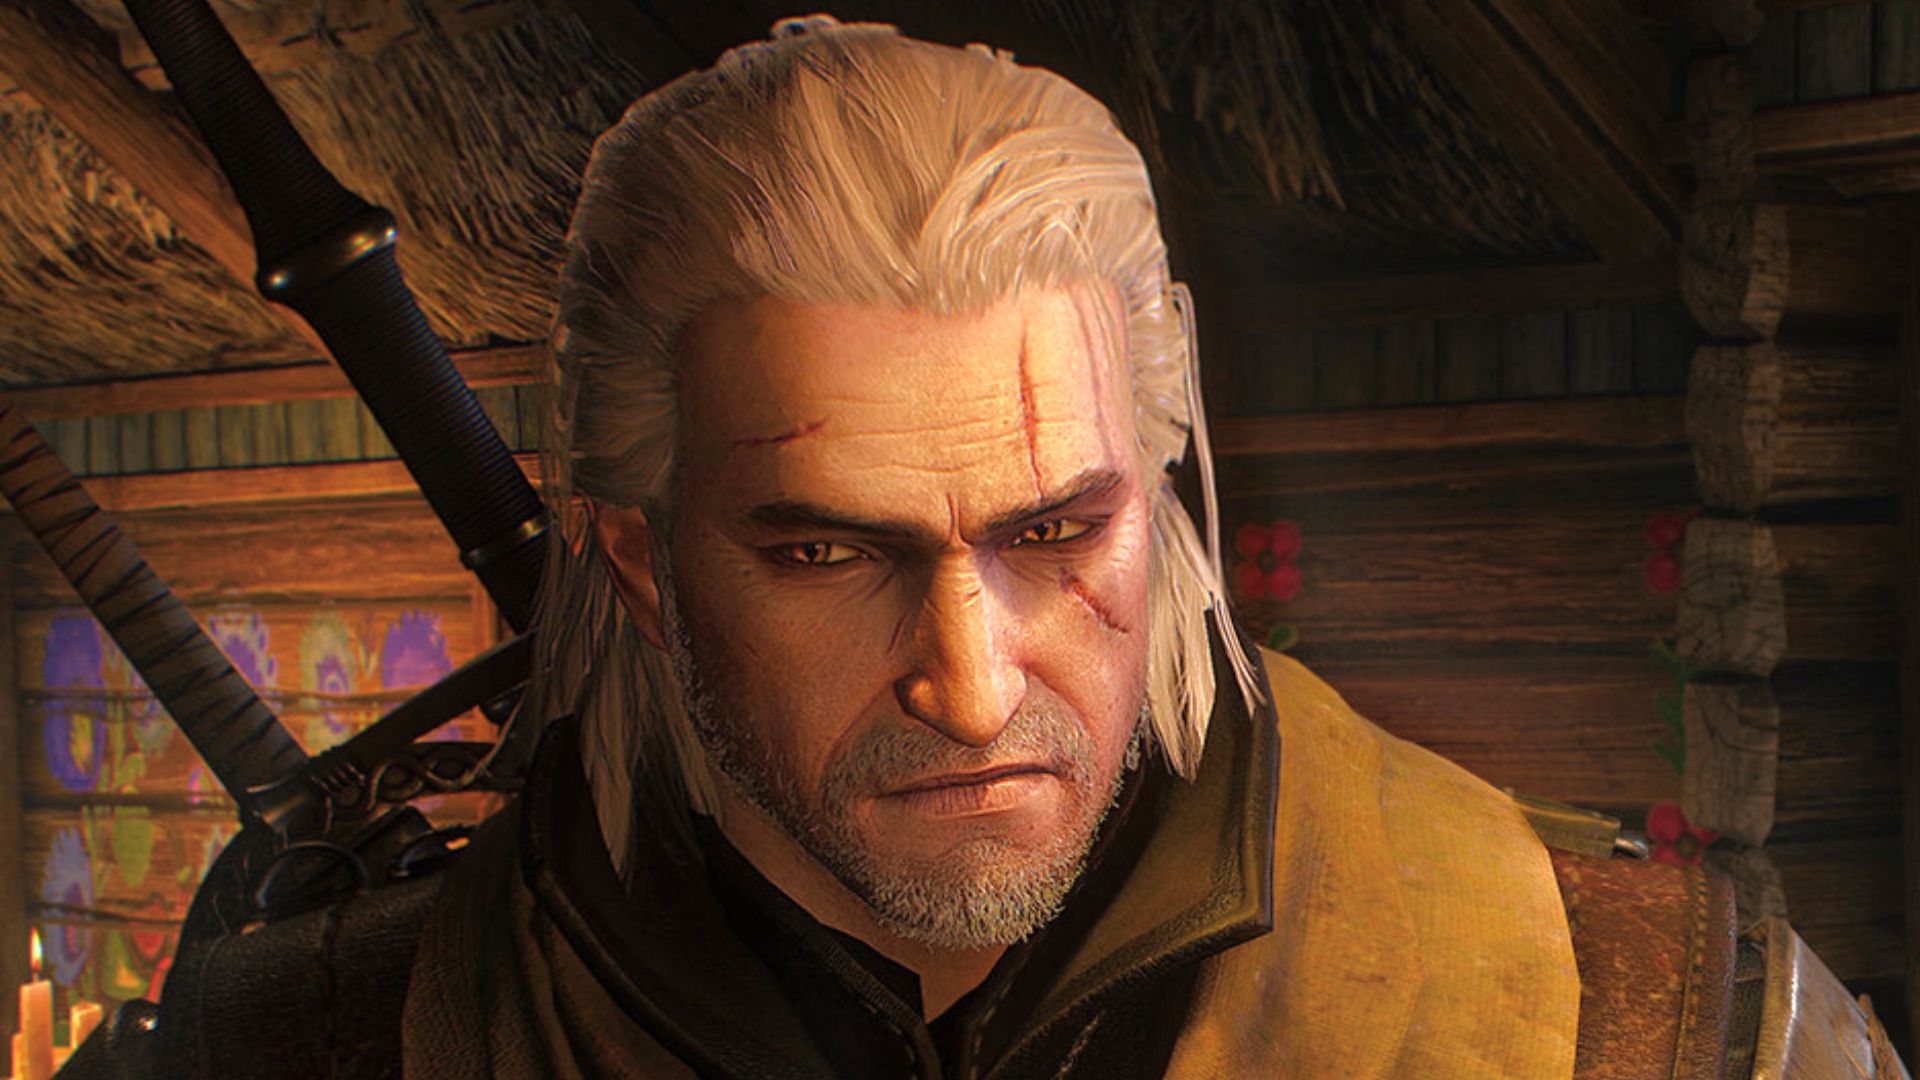 The Witcher 3 next gen release date confirmed with new DLC and mods